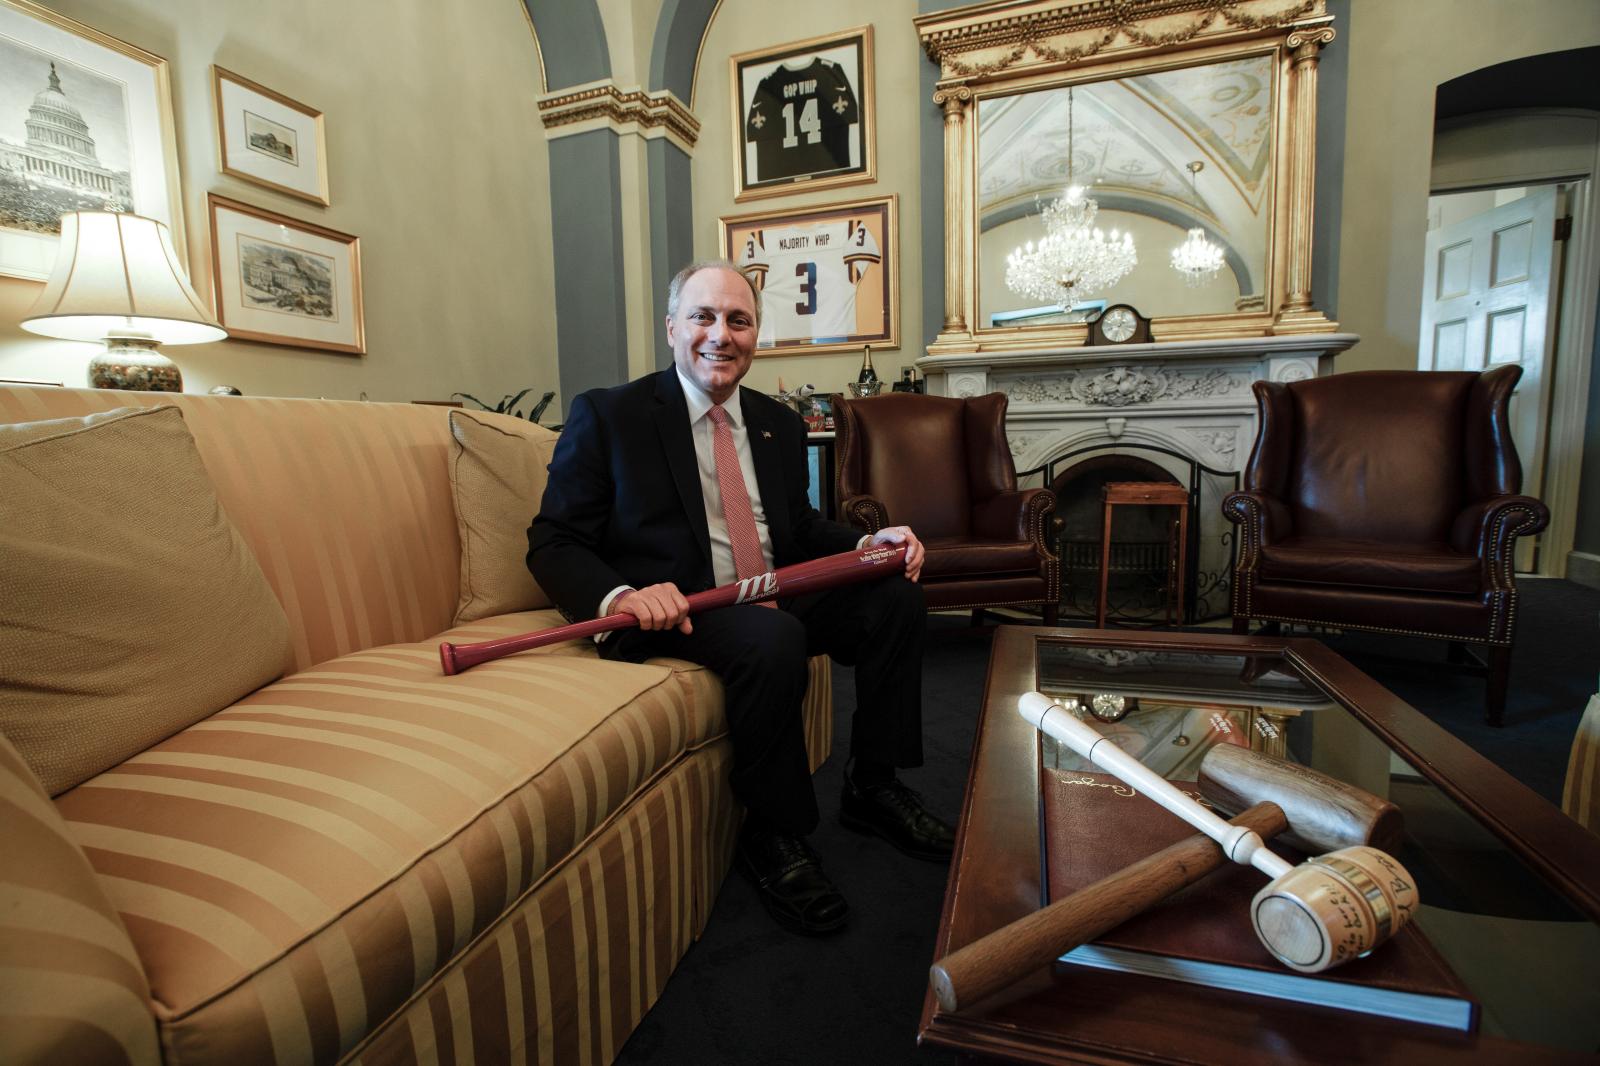 Stephen Joseph Scalise,the United States House of Representatives Majority Whip and representative for Louisiana's 1st congressional district, posing for a portrait at his office in Capitol hill, Washington DC. 